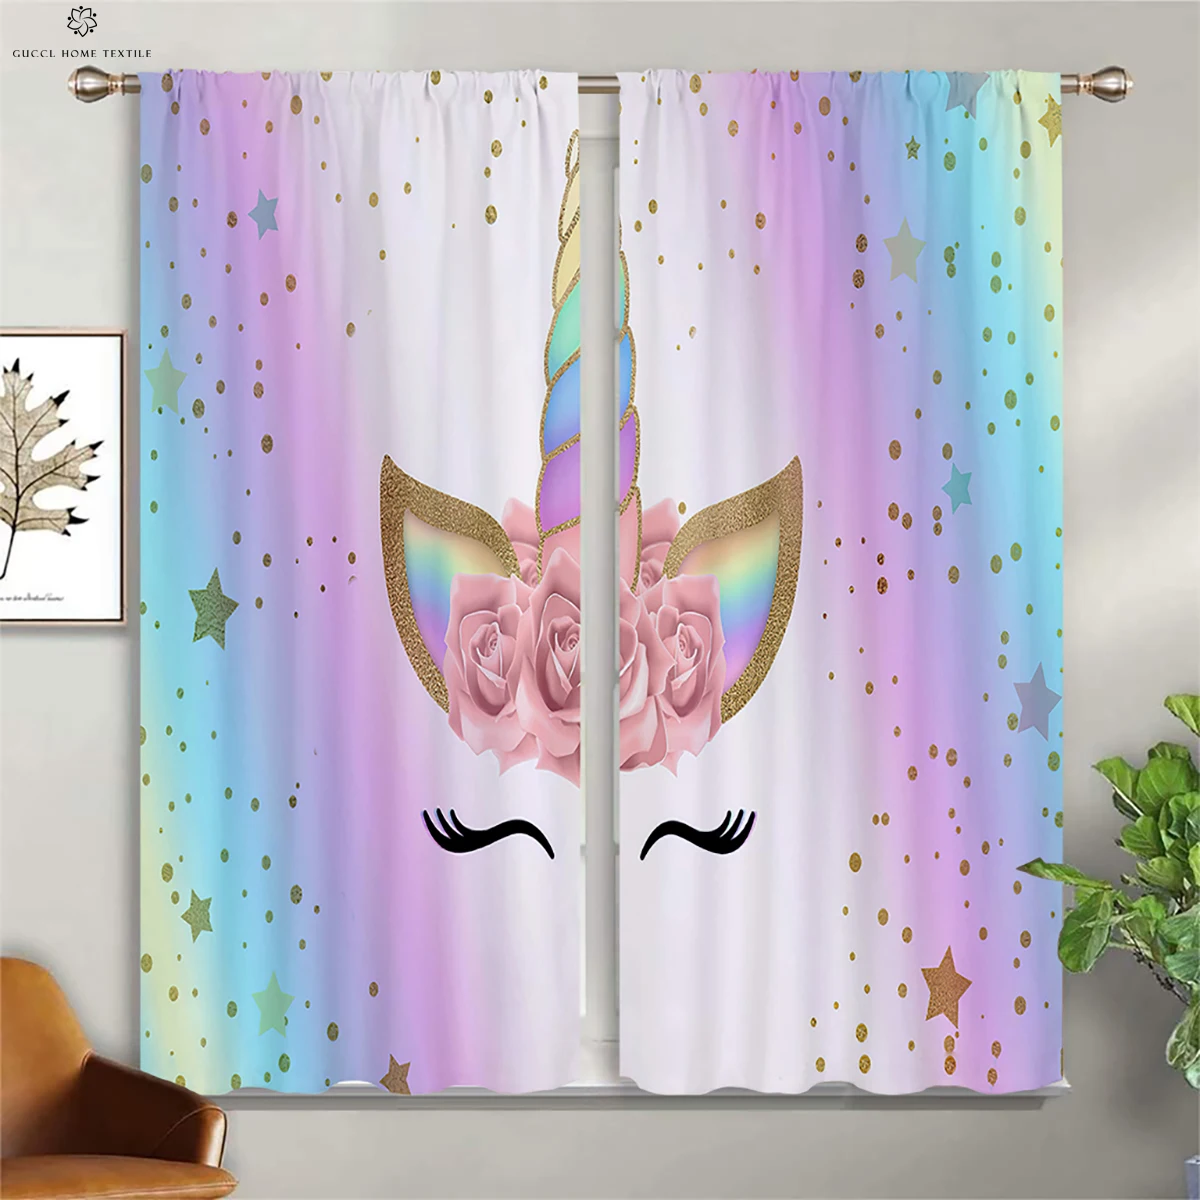 

Blackout Curtains High Quality Unicorn Print Curtains Bedroom Living Room Balcony Decorative Curtains 2 Pieces